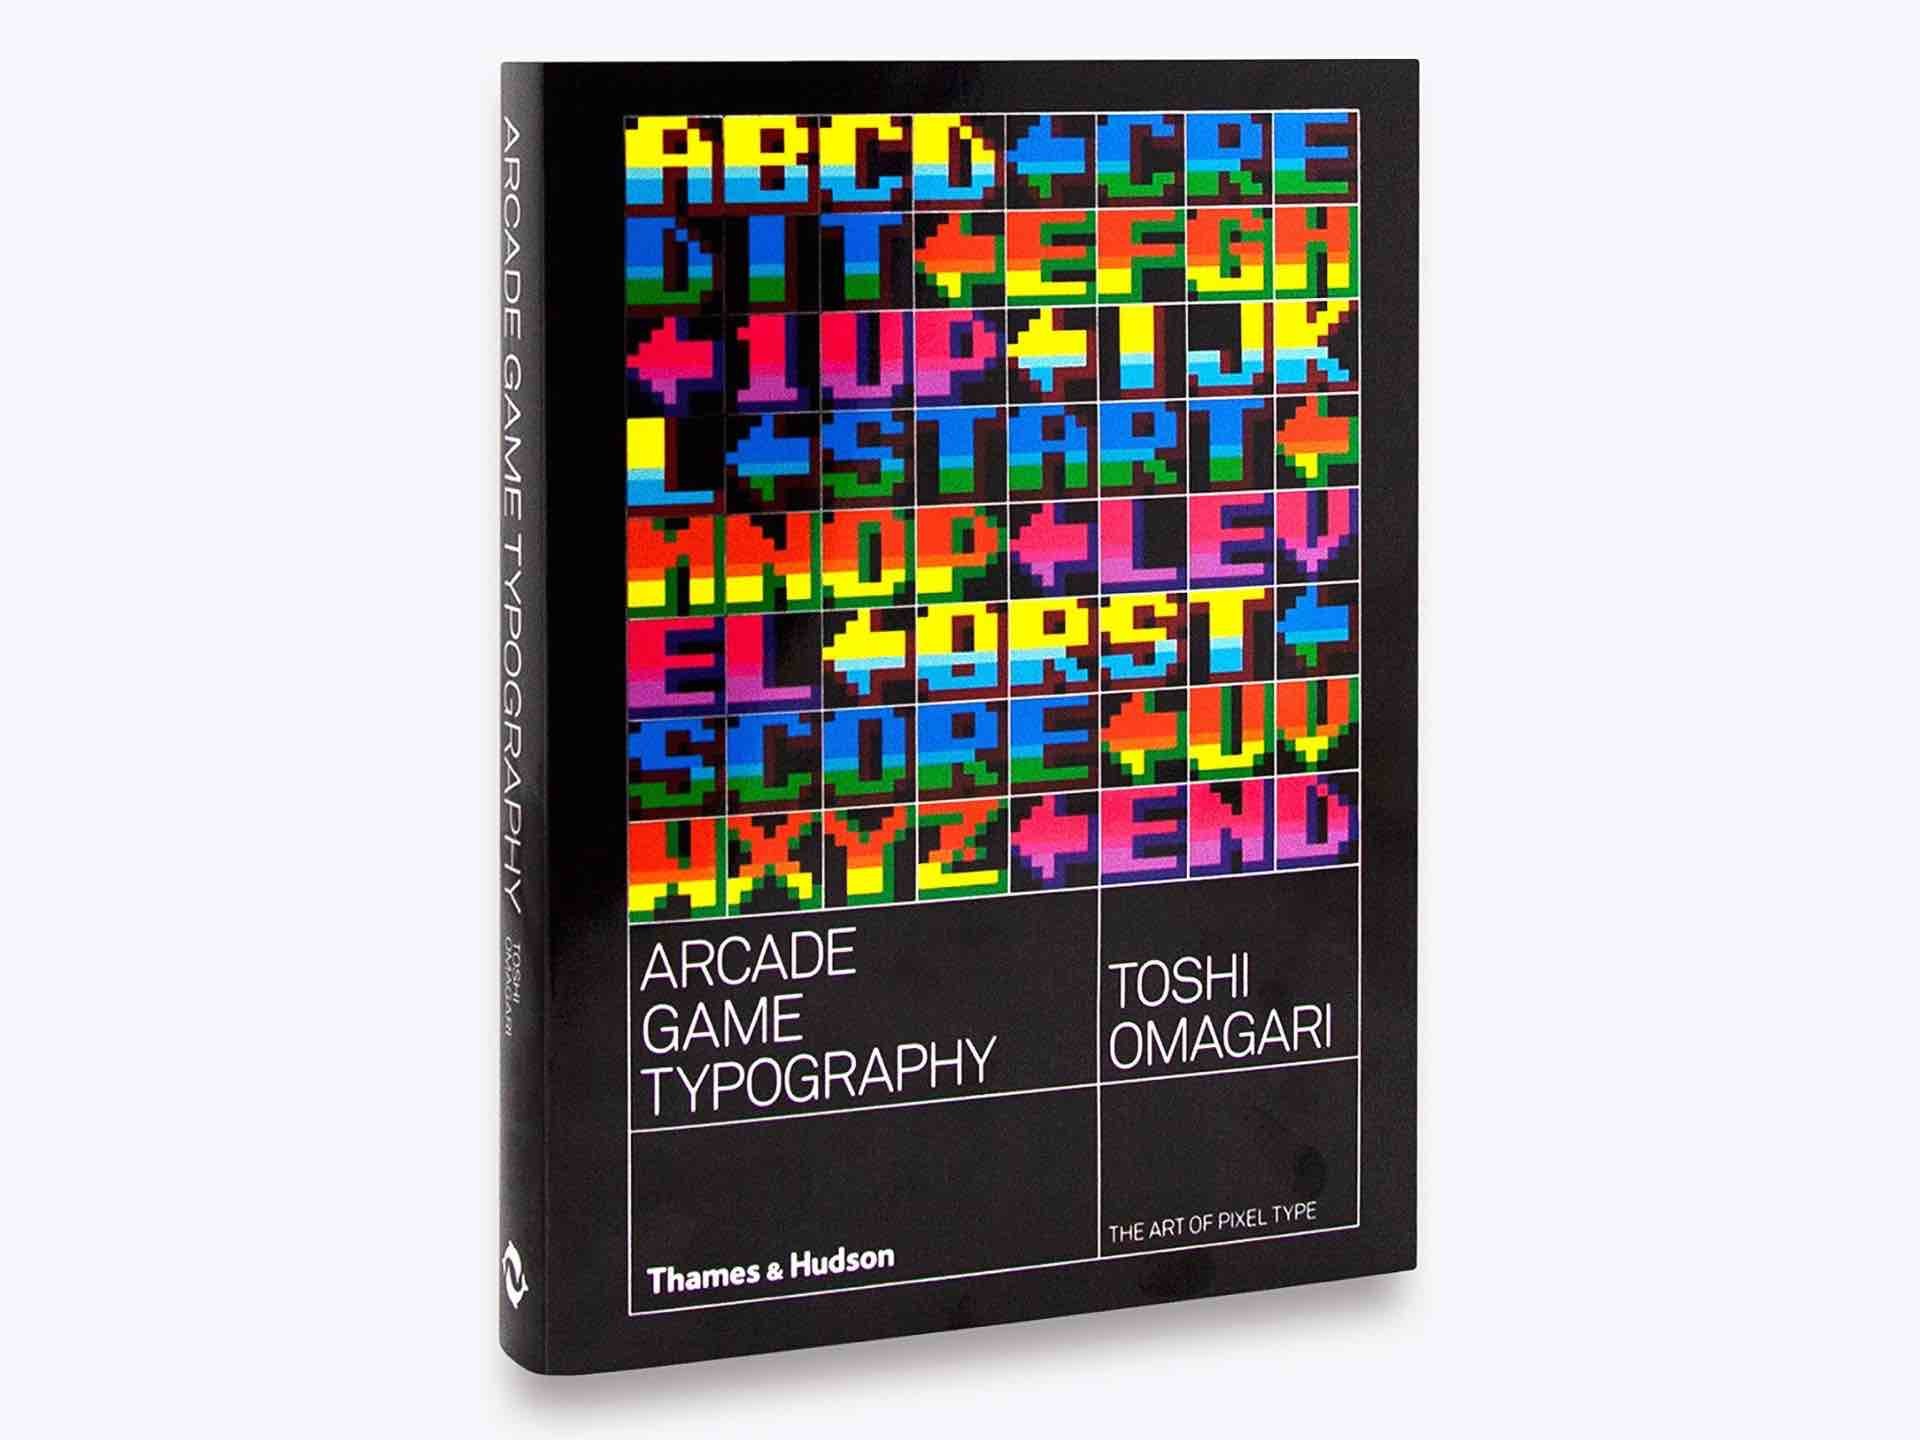 Arcade Game Typography: The Art of Pixel Type by Toshi Omagari. ($28 paperback)